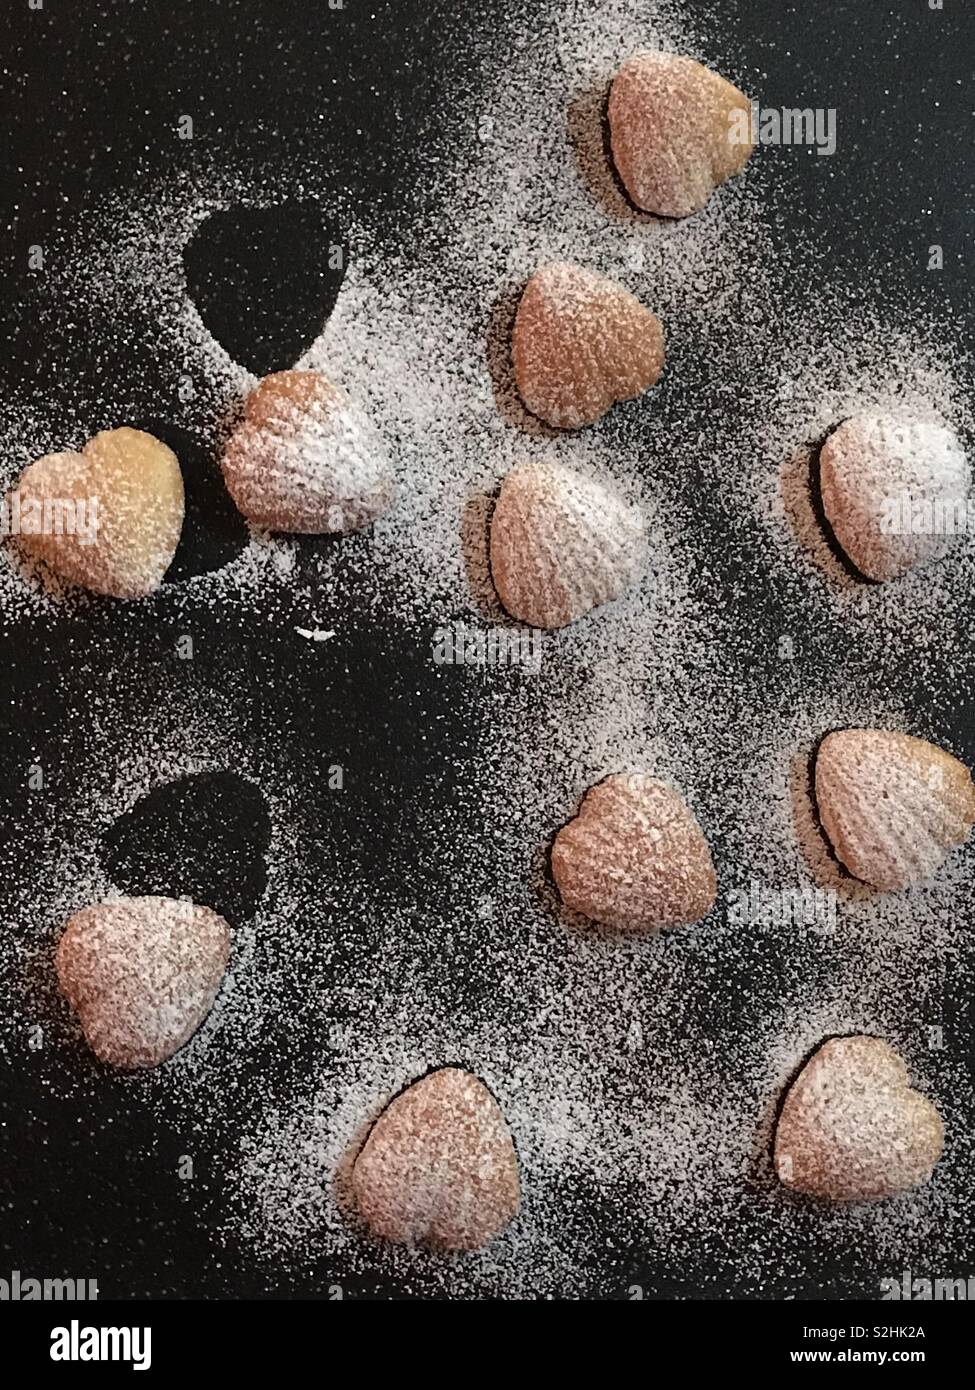 Heart shaped madeleines dusted with powdered sugar Stock Photo